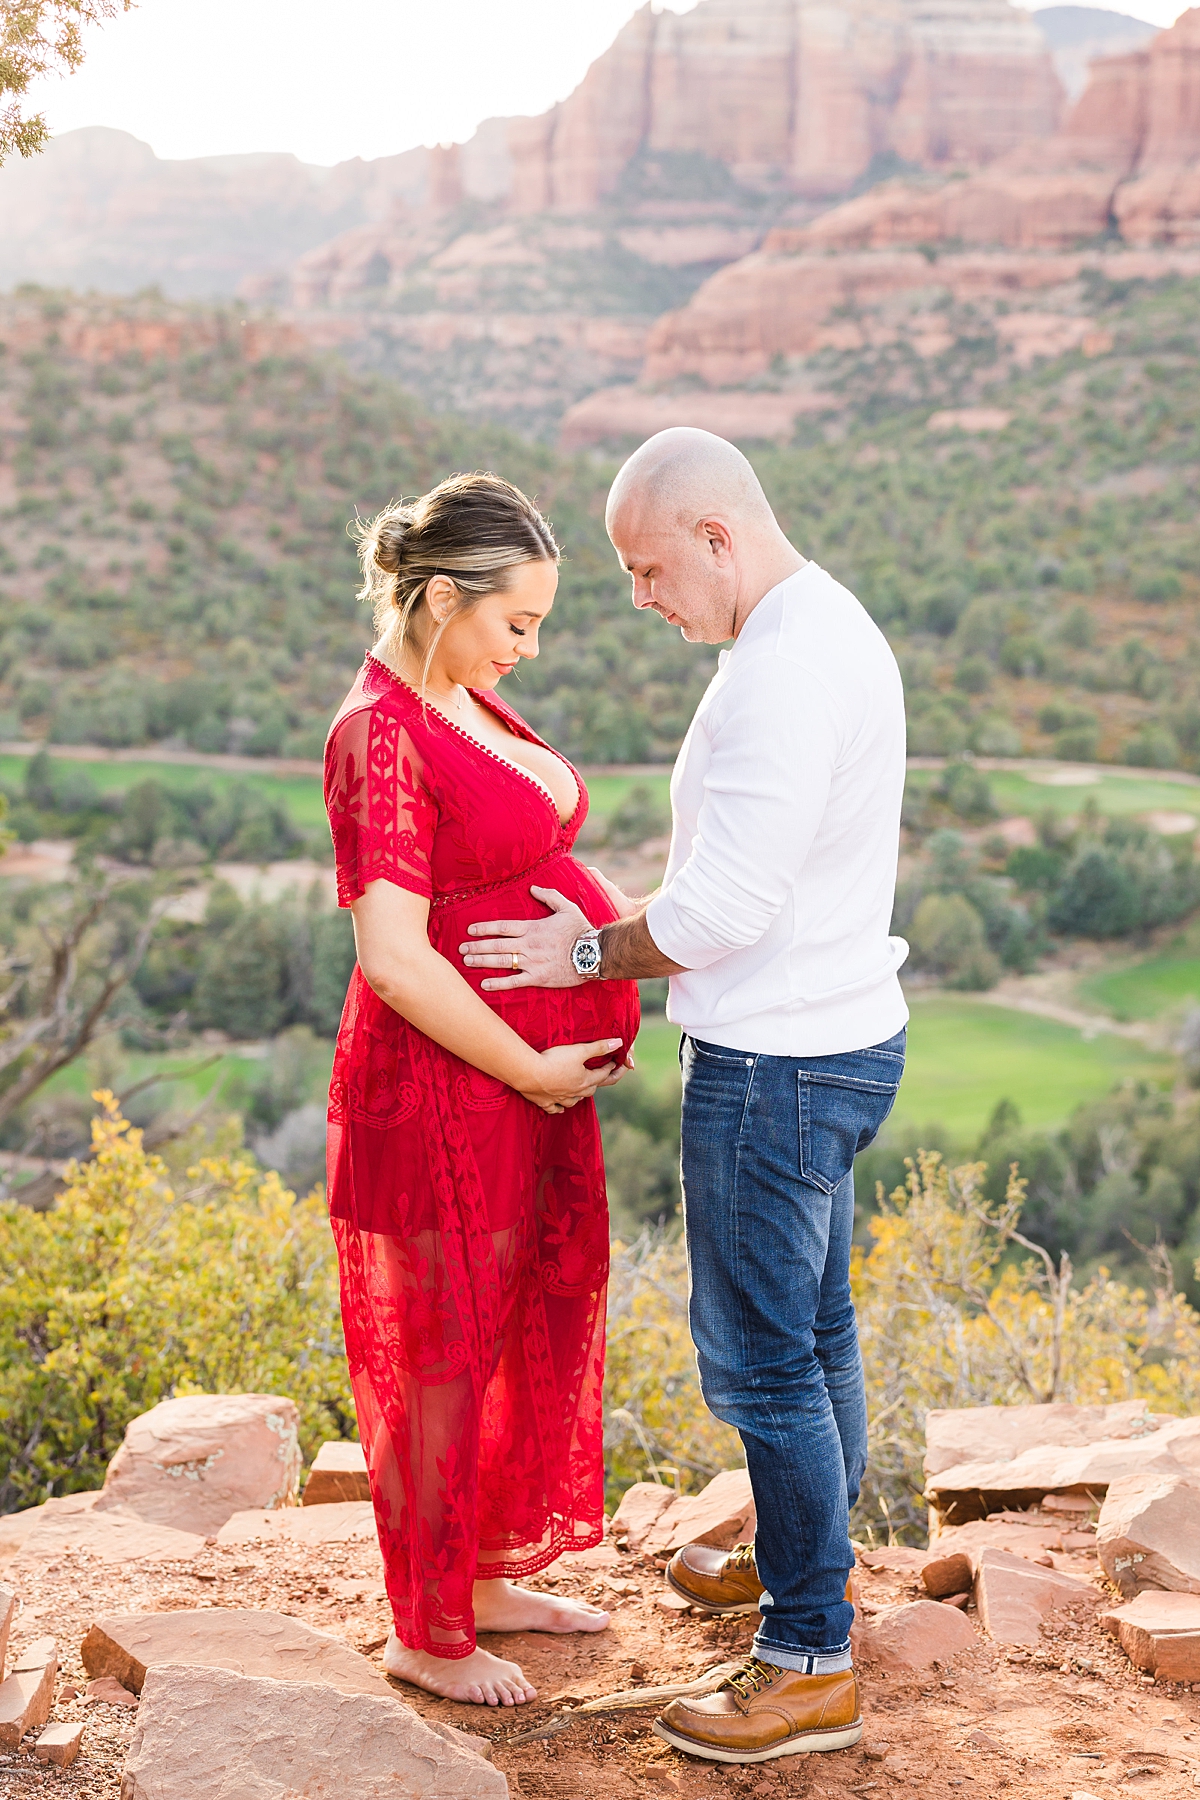 Leah Hope Photography | Scottsdale Arizona Maternity Photographer | Sedona Arizona Pregnancy Photos | Red Rock Desert Mountains | Creek Water Pictures | Maternity Photos | What to Wear | Maternity Poses and Posing | Maternity Photographer | Motherhood Photography | Outfit and Styling Ideas | Bump Pictures | Pregnancy Pictures | Baby Bump